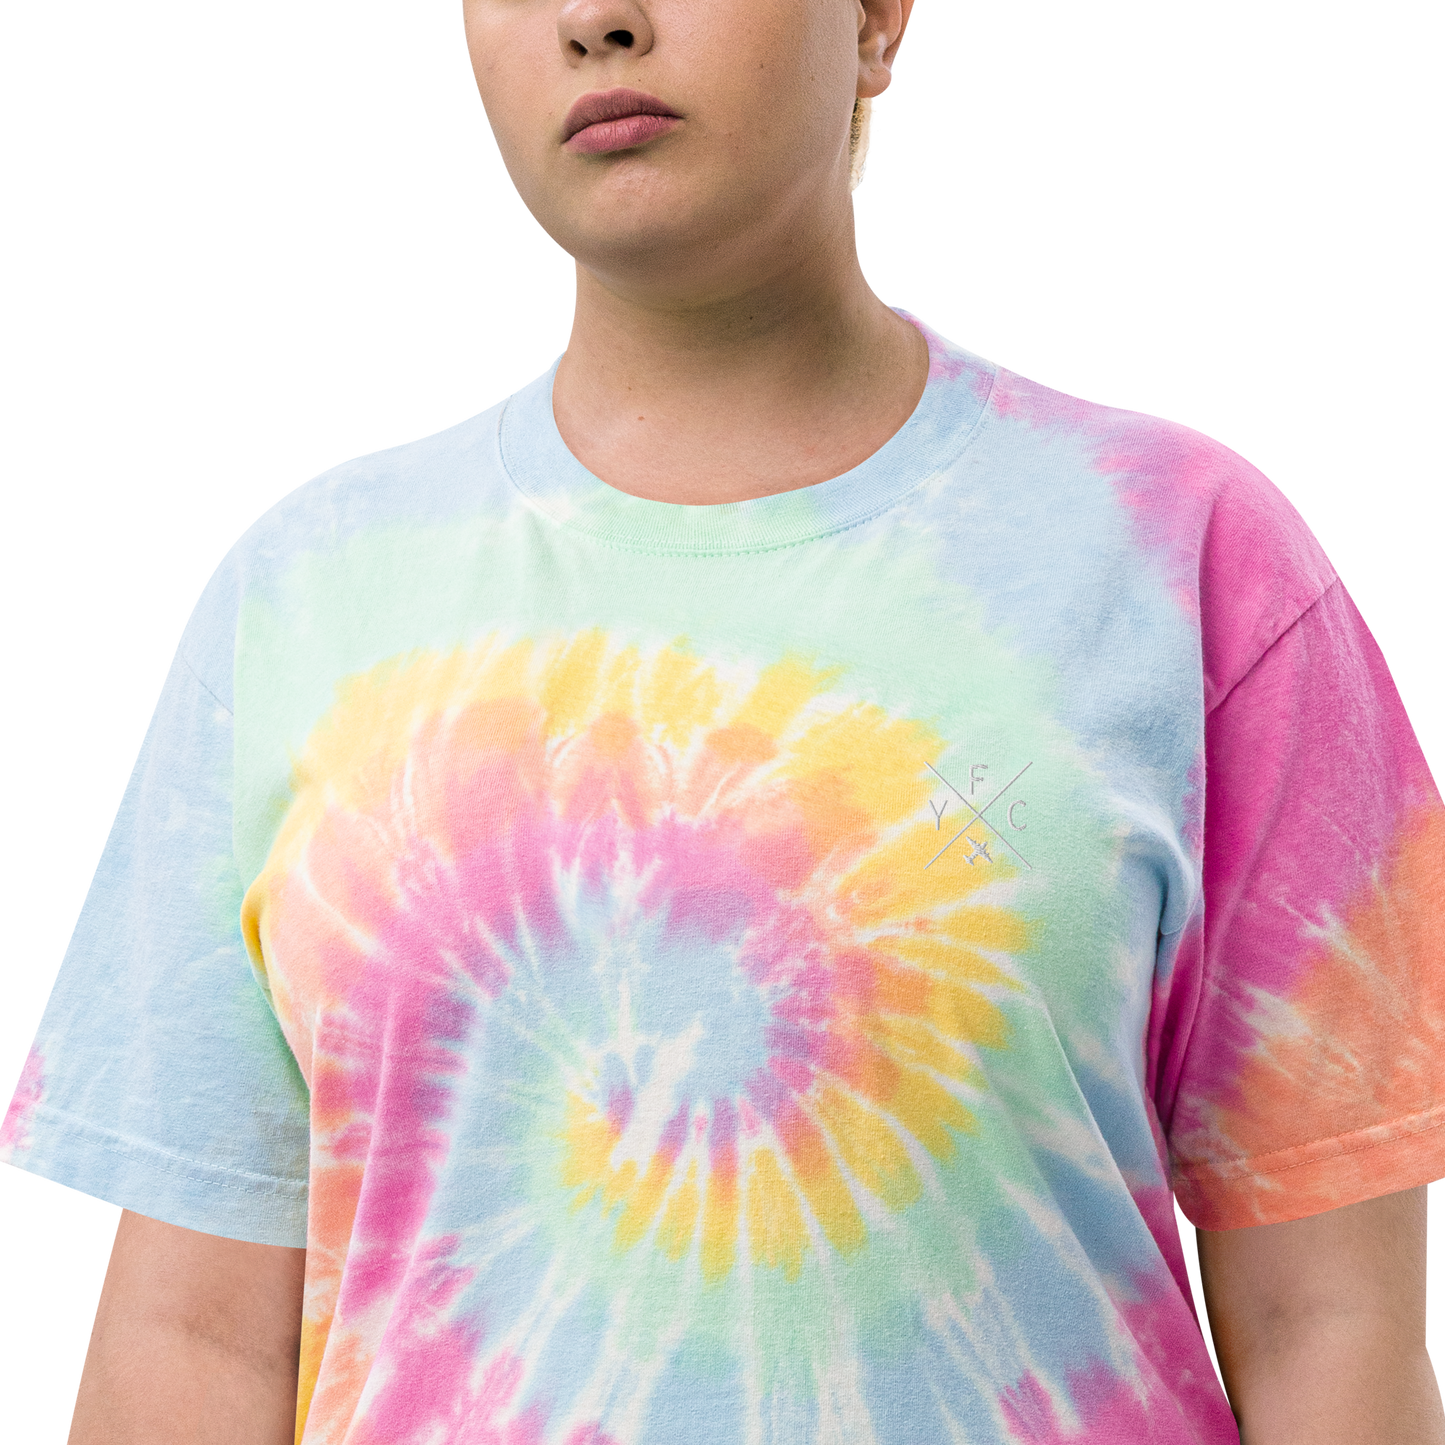 YHM Designs - YFC Fredericton Oversized Tie-Dye T-Shirt - Crossed-X Design with Airport Code and Vintage Propliner - White Embroidery - Image 13